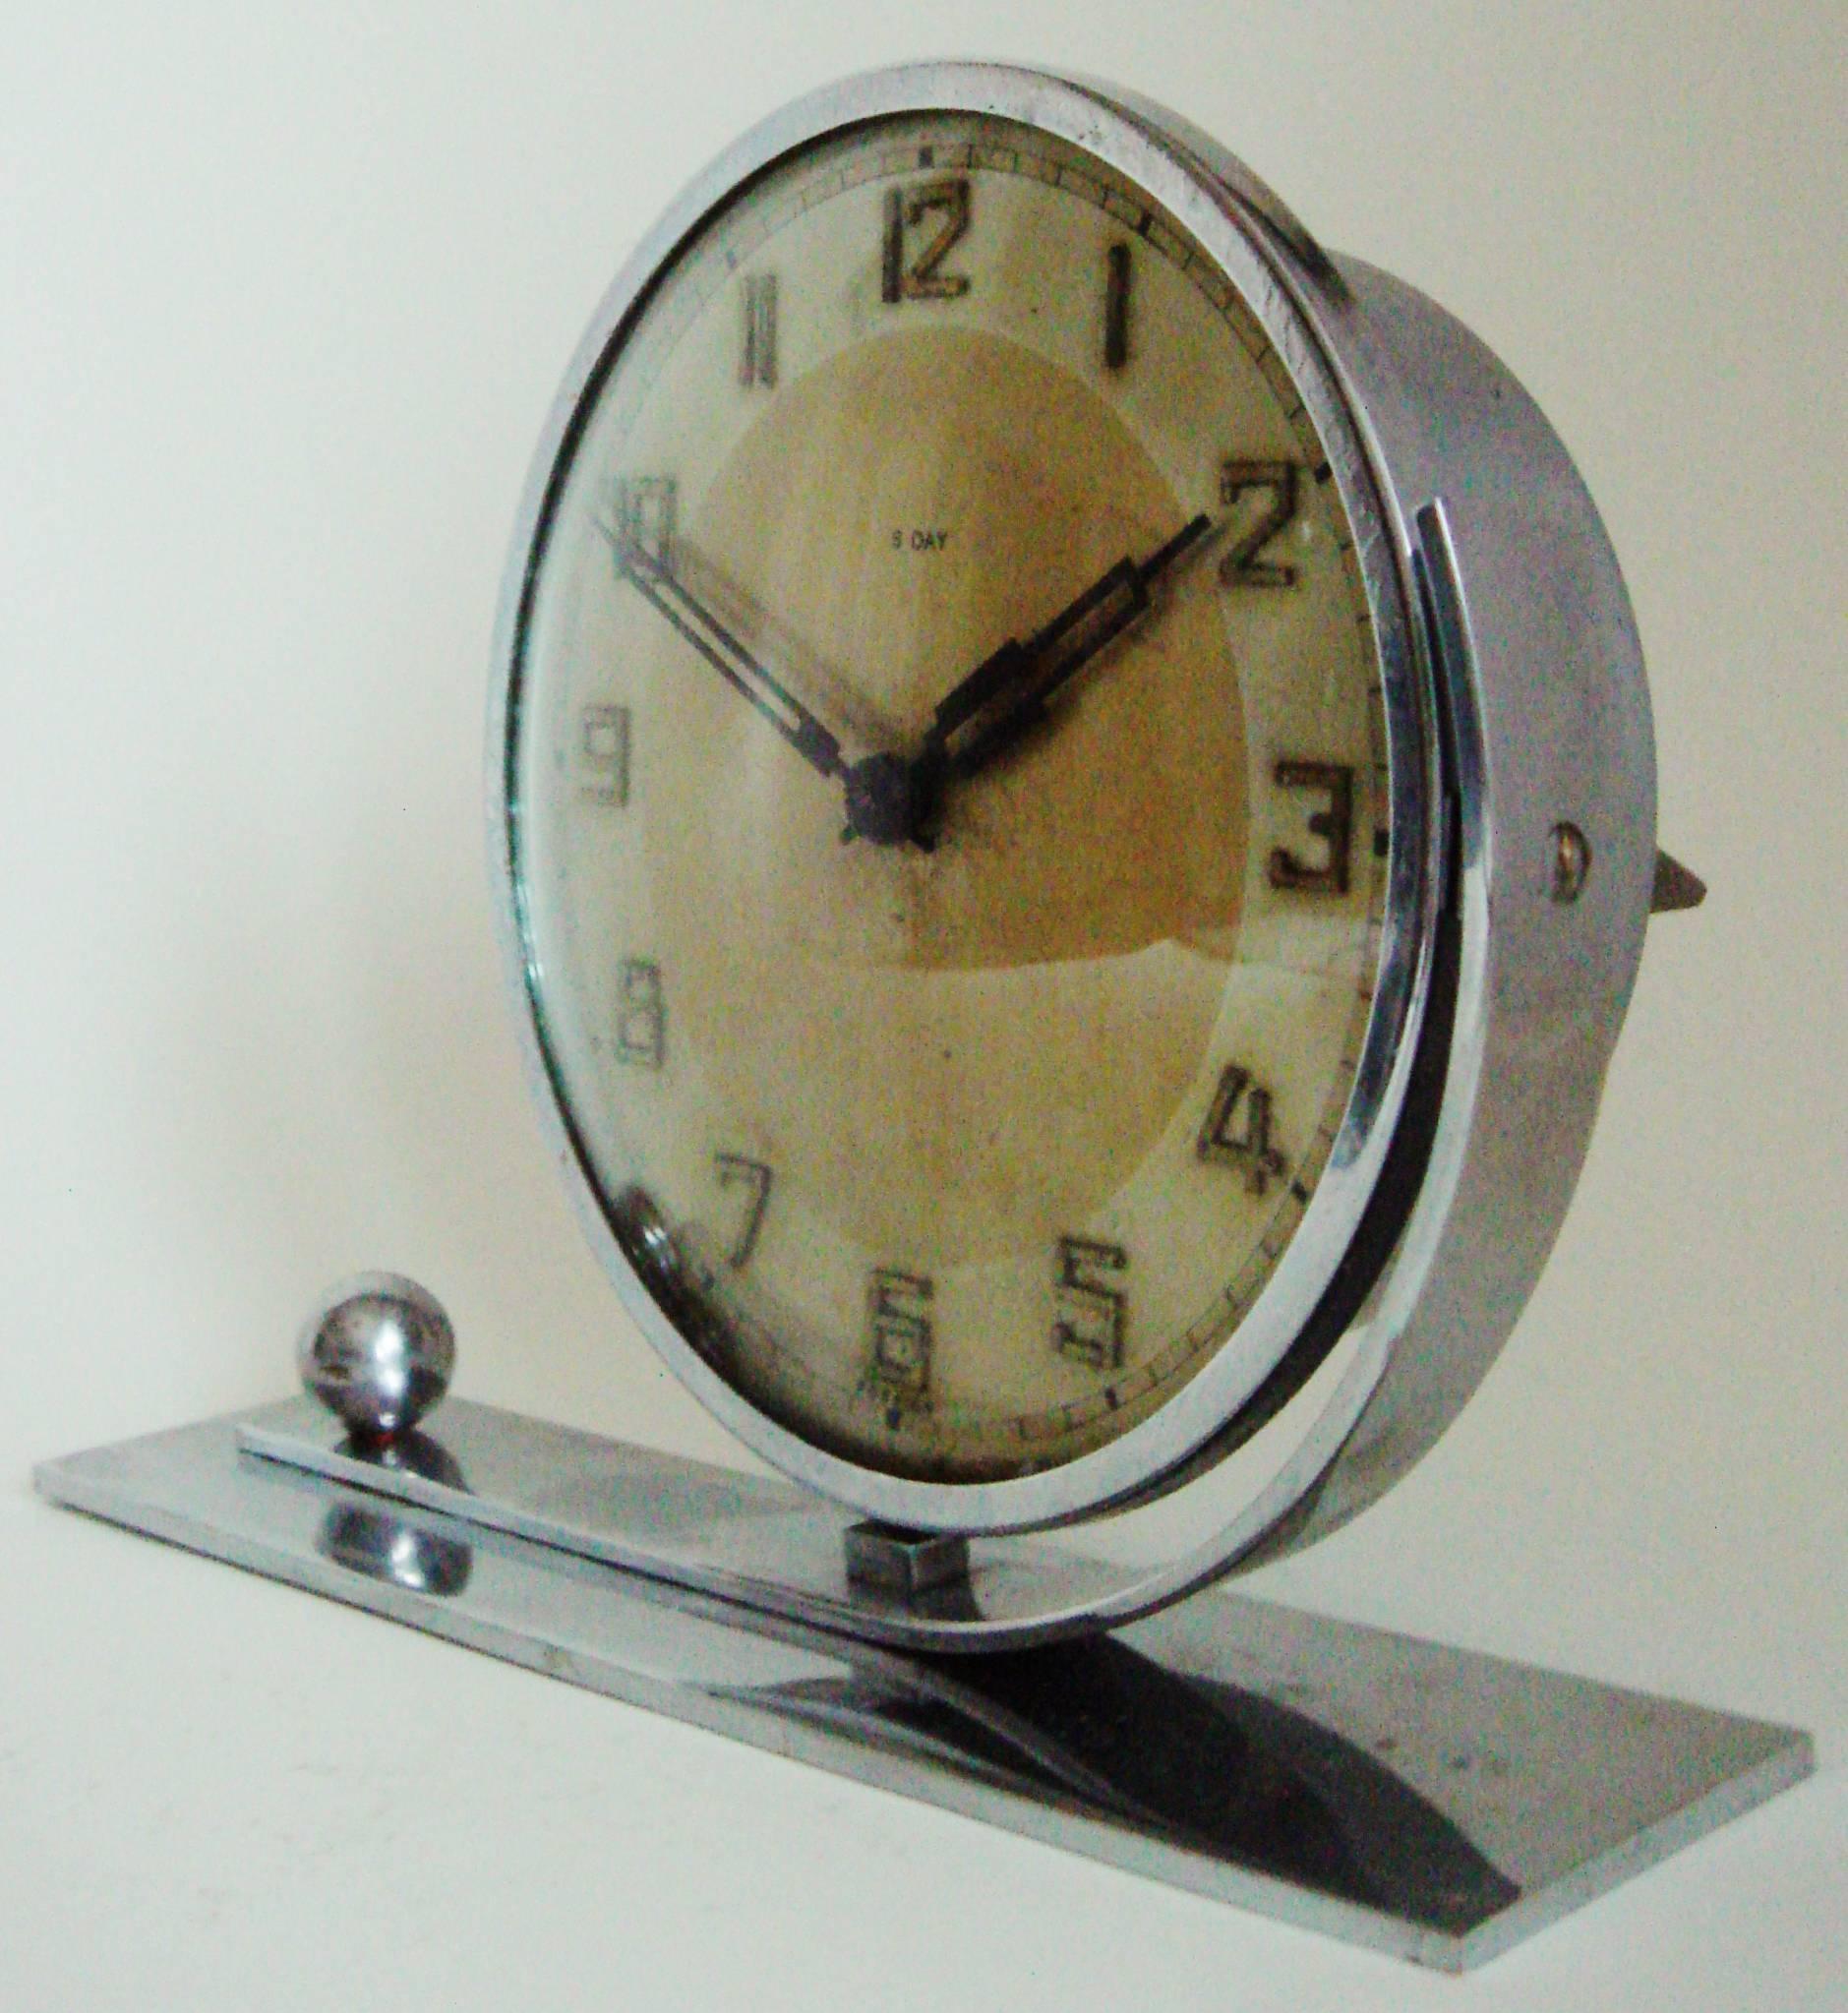 This stylish German Art Deco asymmetrical, 8-day, mechanical desk clock features a circular face with a chrome bezel mounted to a curved chrome strip. This is anchored to an oblong chrome base by a chrome sphere. The face is stamped 8 Days and